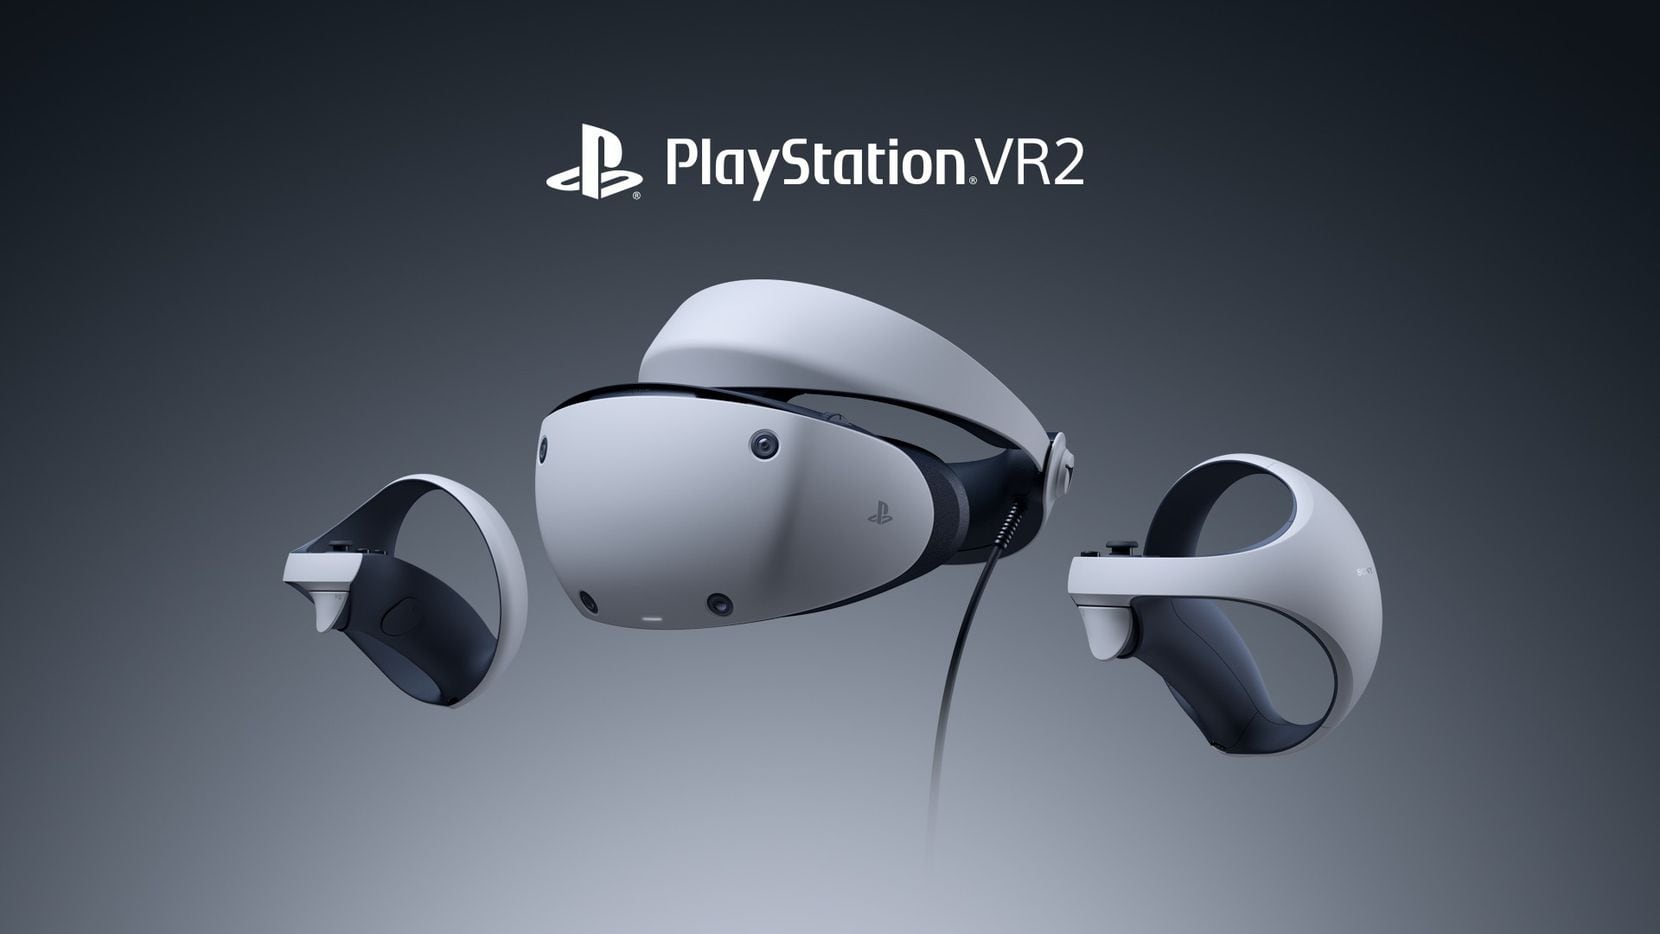 Promotional imagery for the PlayStation VR2, a virtual reality headset add-on for Sony's...